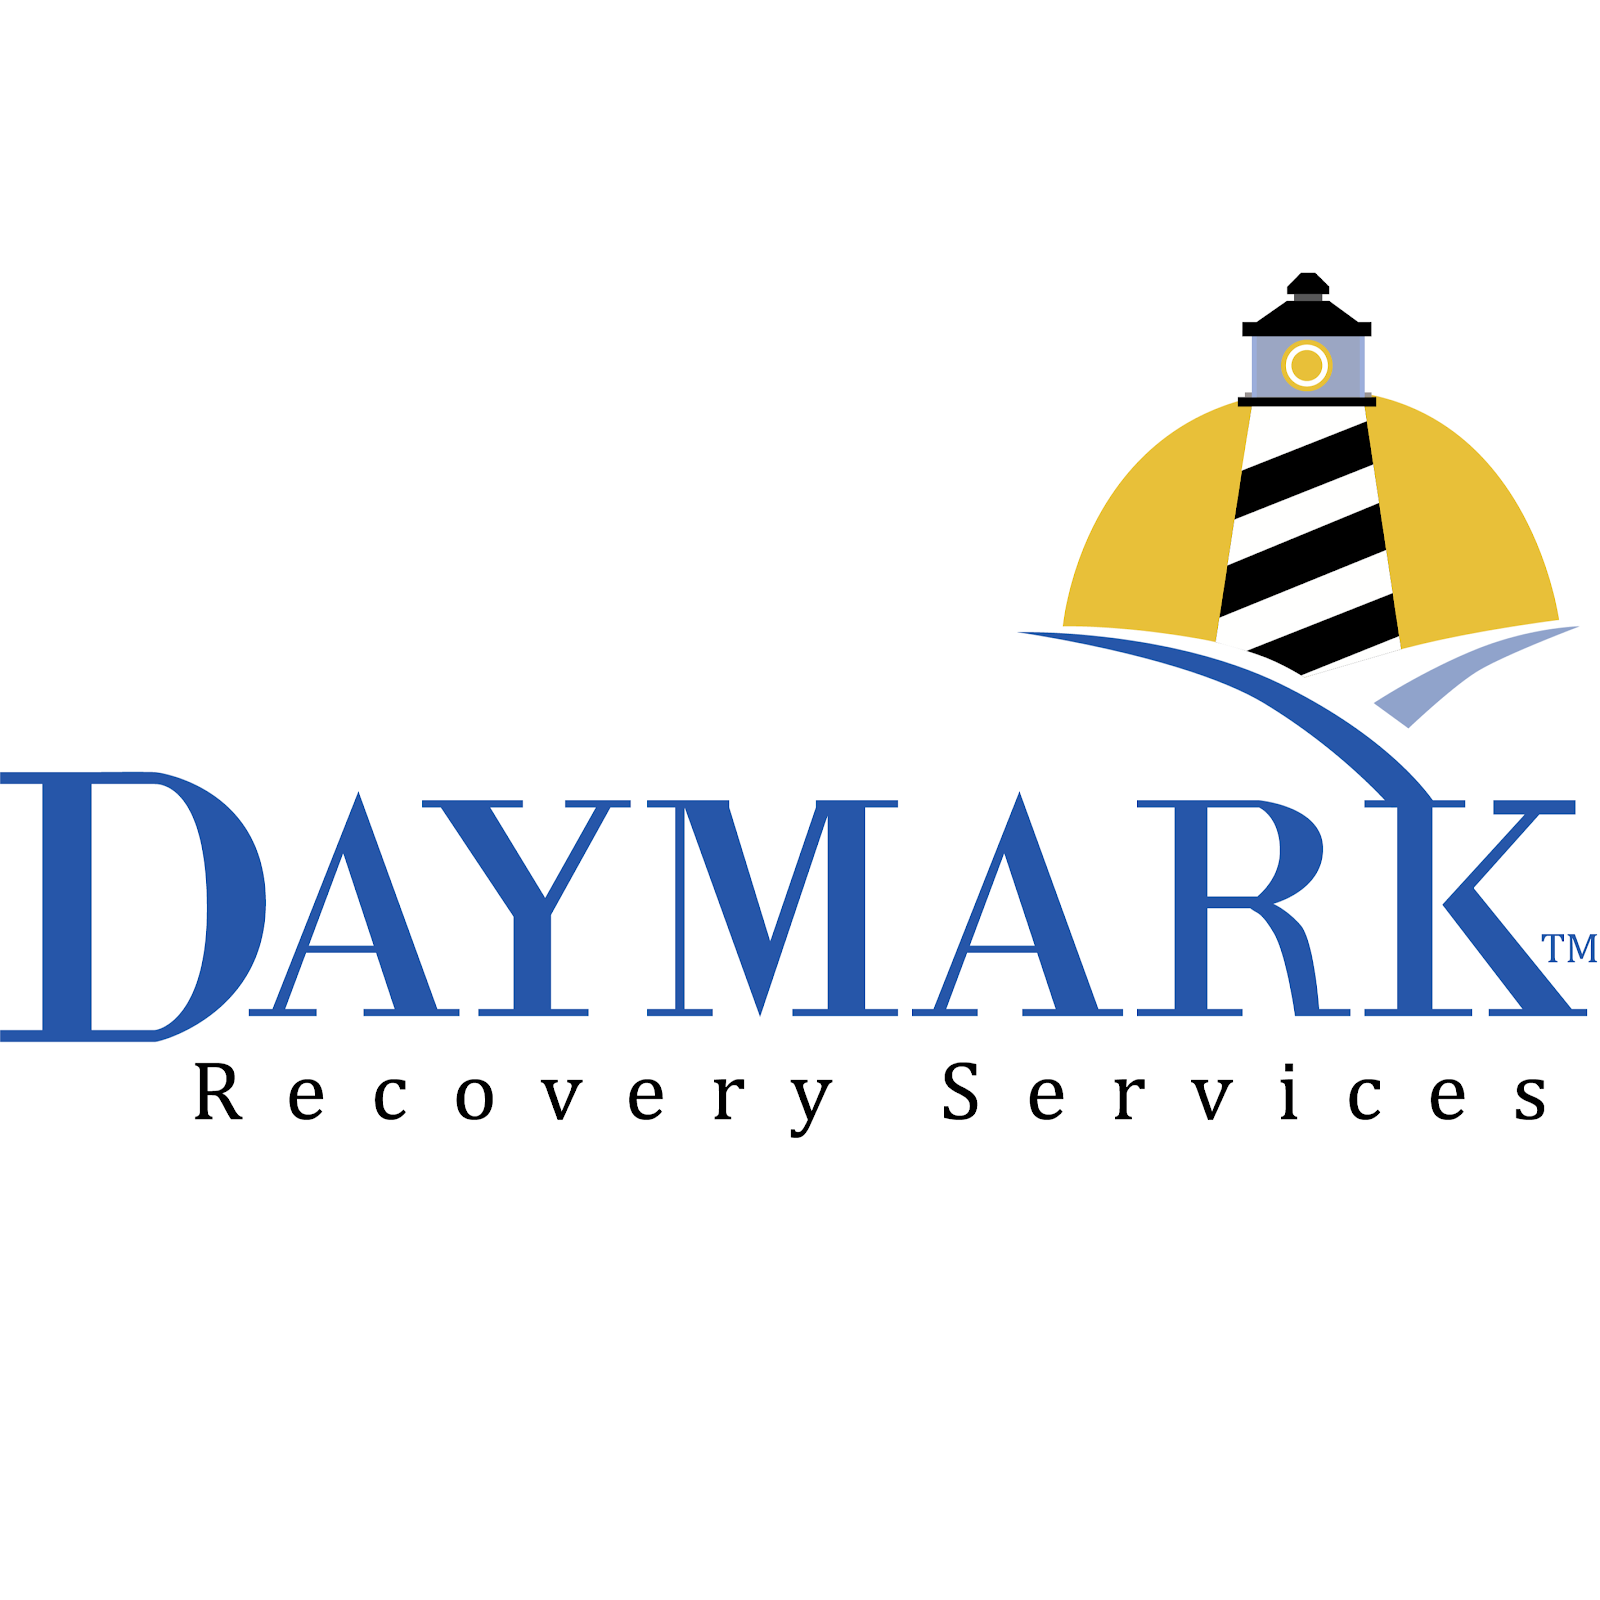 Daymark Recovery Services - Facility Based Crisis